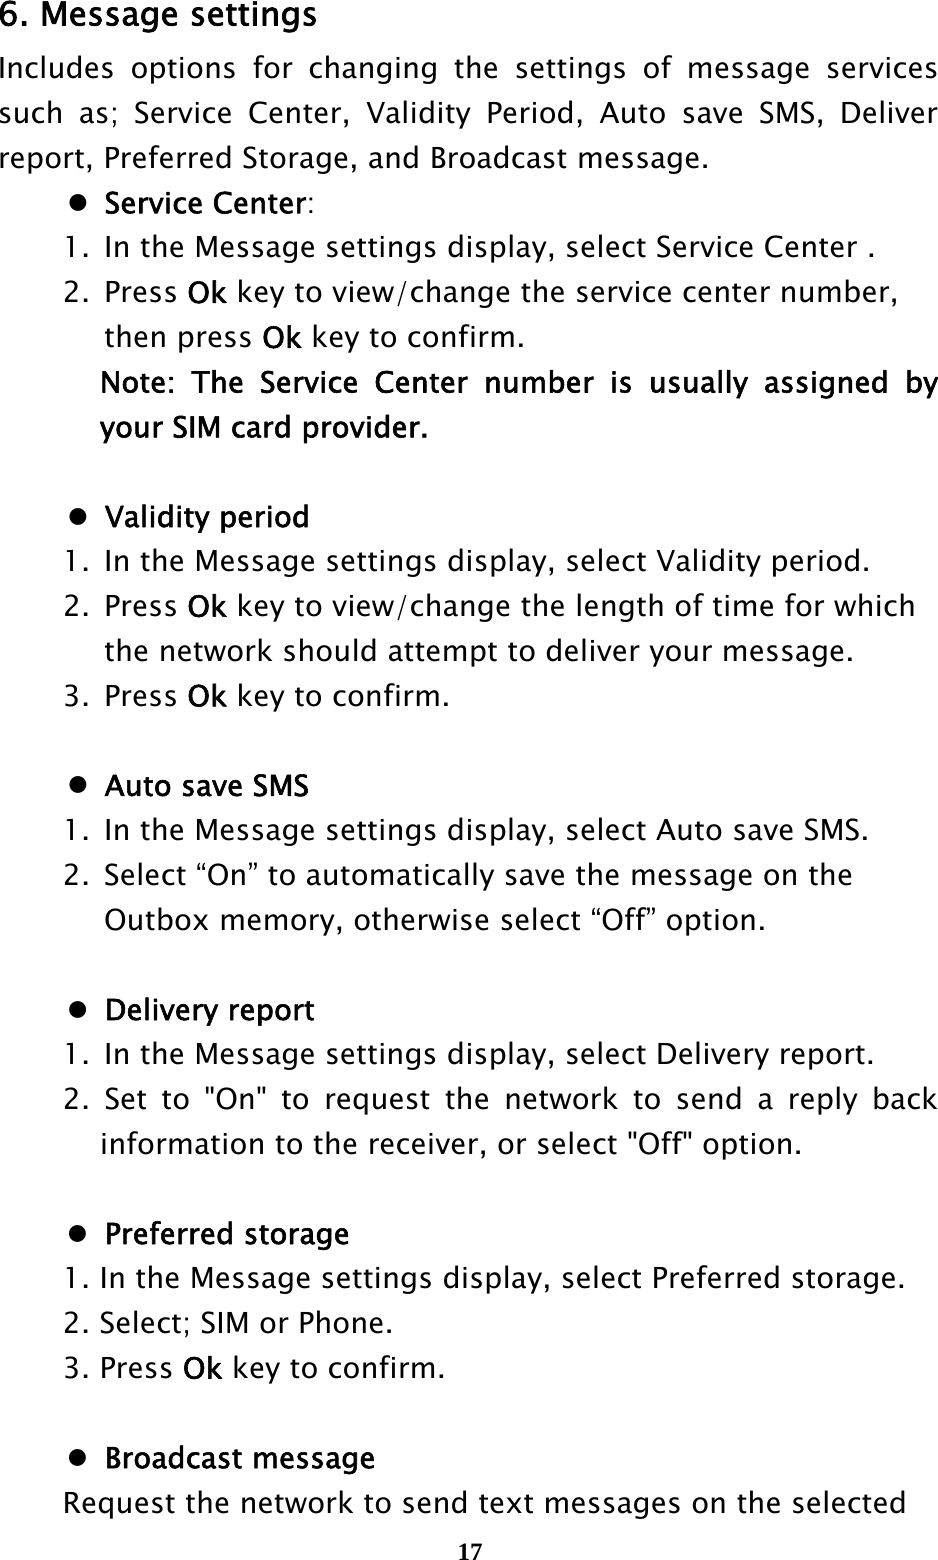  176. Message settings Includes options for changing the settings of message services such as; Service Center, Validity Period, Auto save SMS, Deliver report, Preferred Storage, and Broadcast message.  Service Center:   1.  In the Message settings display, select Service Center .  2. Press Ok key to view/change the service center number,     then press Ok key to confirm.    Note: The Service Center number is usually assigned by your SIM card provider.   Validity period   1.  In the Message settings display, select Validity period.  2. Press Ok key to view/change the length of time for which       the network should attempt to deliver your message.  3. Press Ok key to confirm.   Auto save SMS   1.  In the Message settings display, select Auto save SMS.   2.  Select “On” to automatically save the message on the       Outbox memory, otherwise select “Off” option.   Delivery report    1.  In the Message settings display, select Delivery report.   2. Set to &quot;On&quot; to request the network to send a reply back information to the receiver, or select &quot;Off&quot; option.   Preferred storage   1. In the Message settings display, select Preferred storage.   2. Select; SIM or Phone.  3. Press Ok key to confirm.   Broadcast message   Request the network to send text messages on the selected   